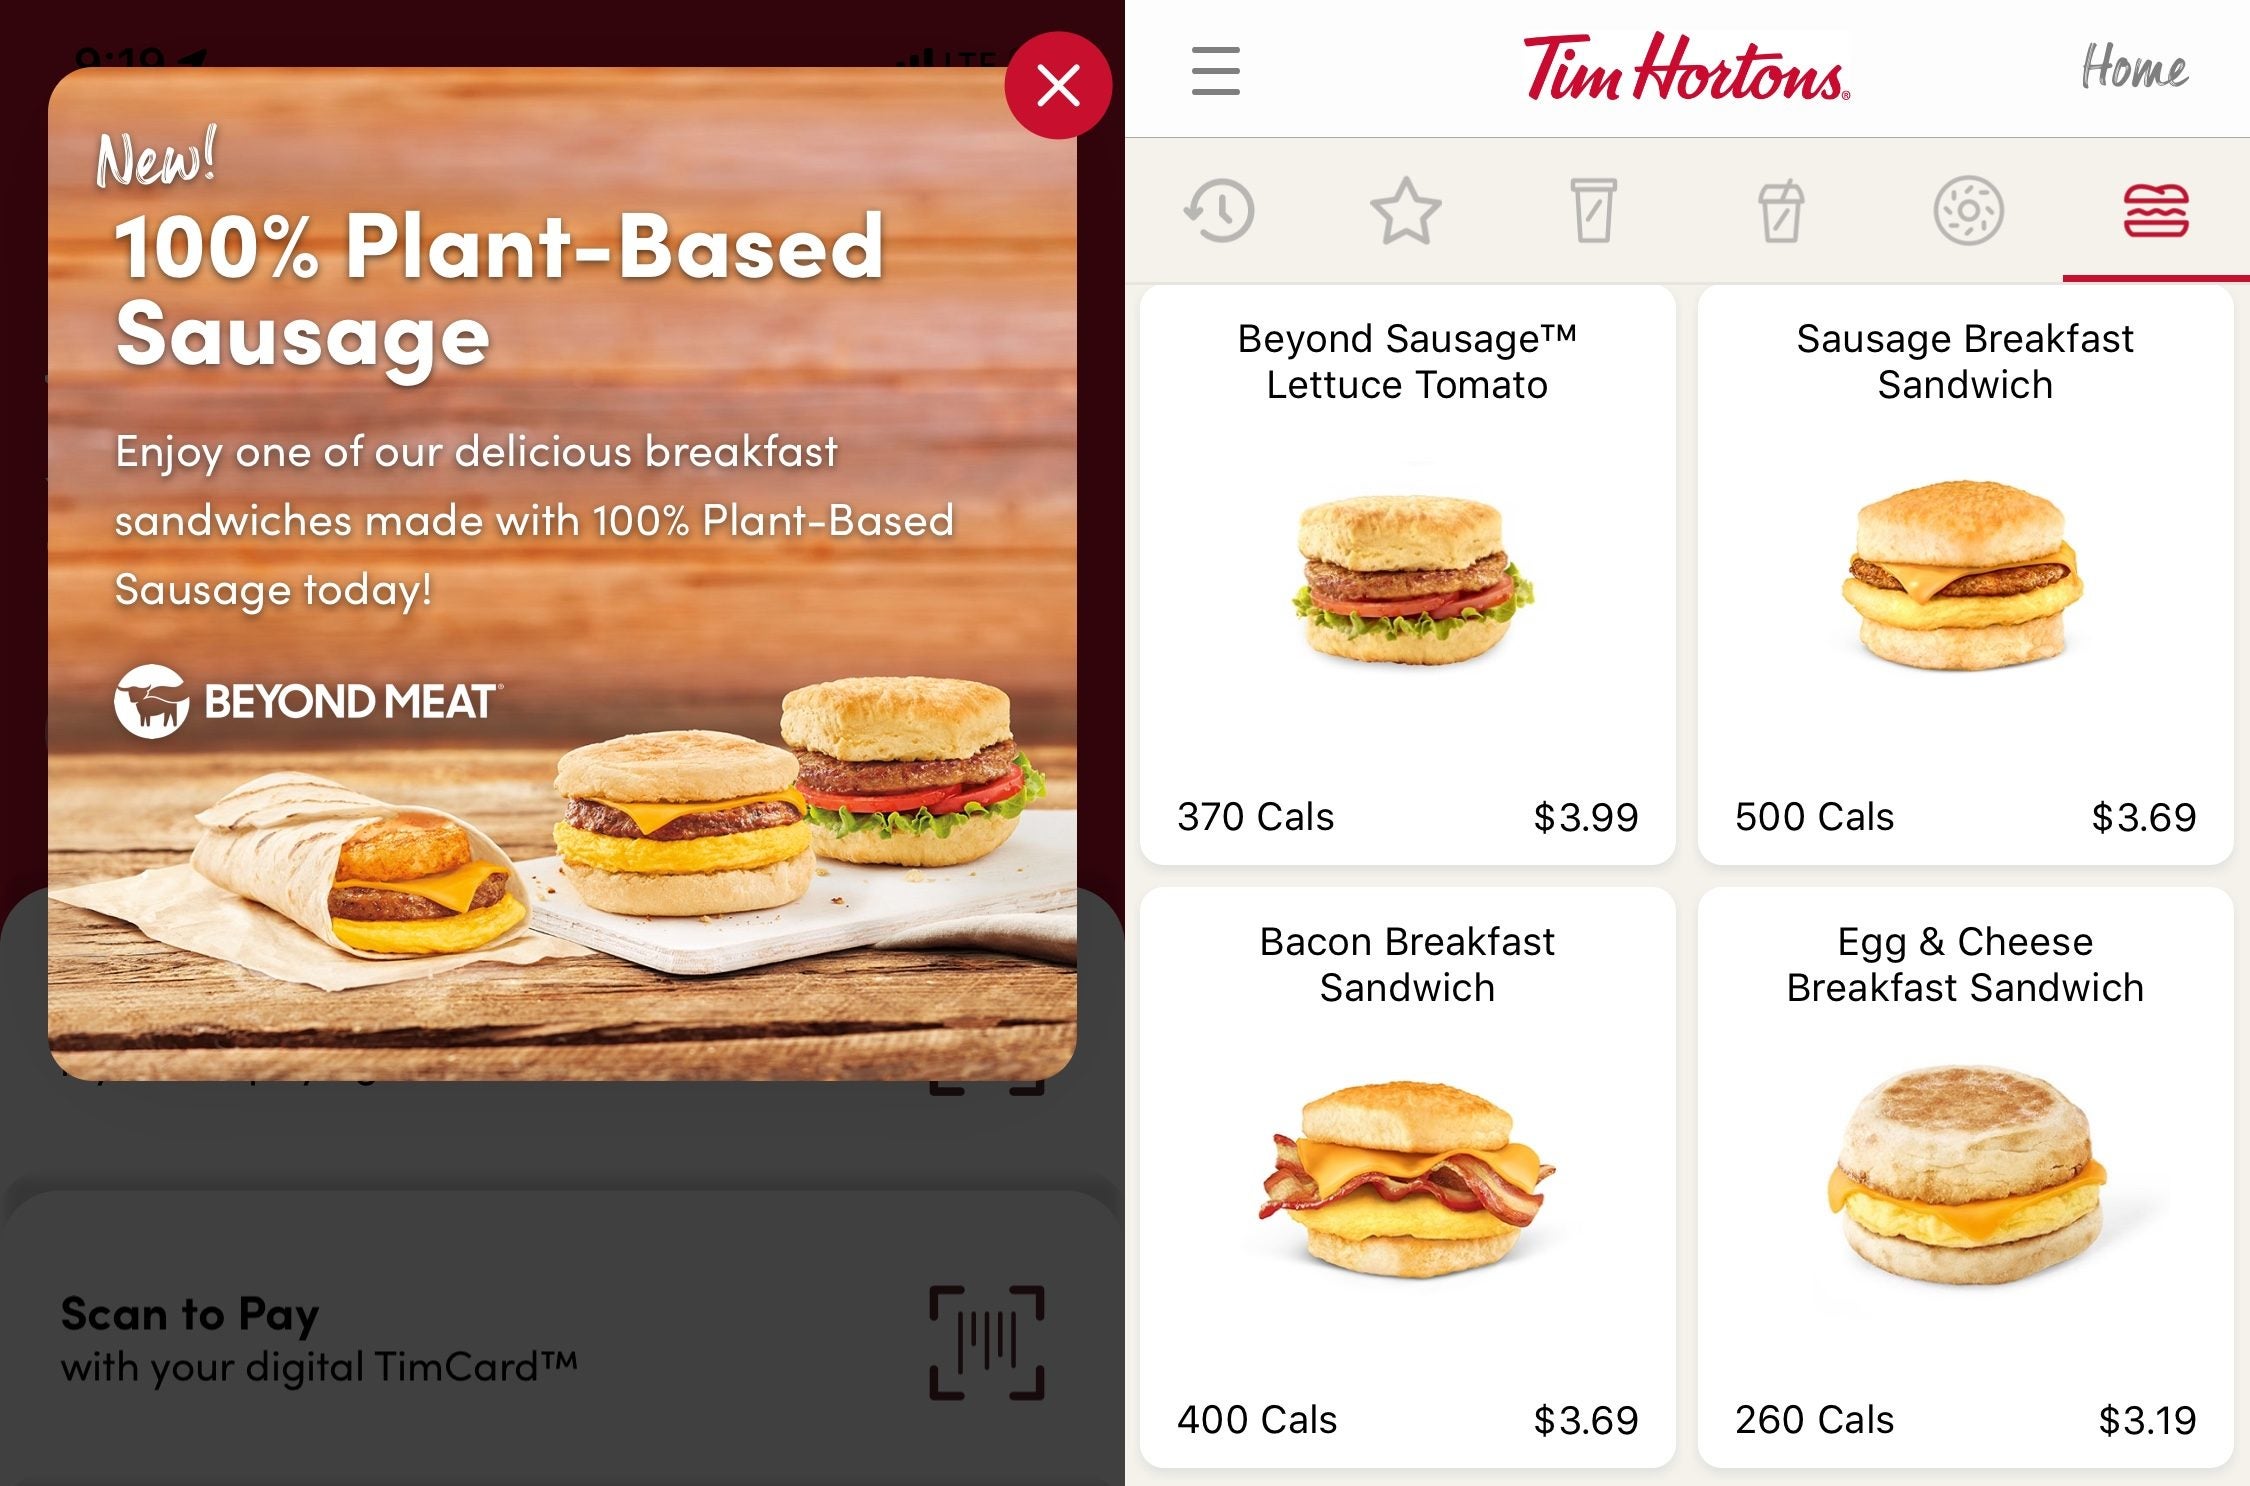 Tim Hortons puts burgers on the menu for the first time, but they